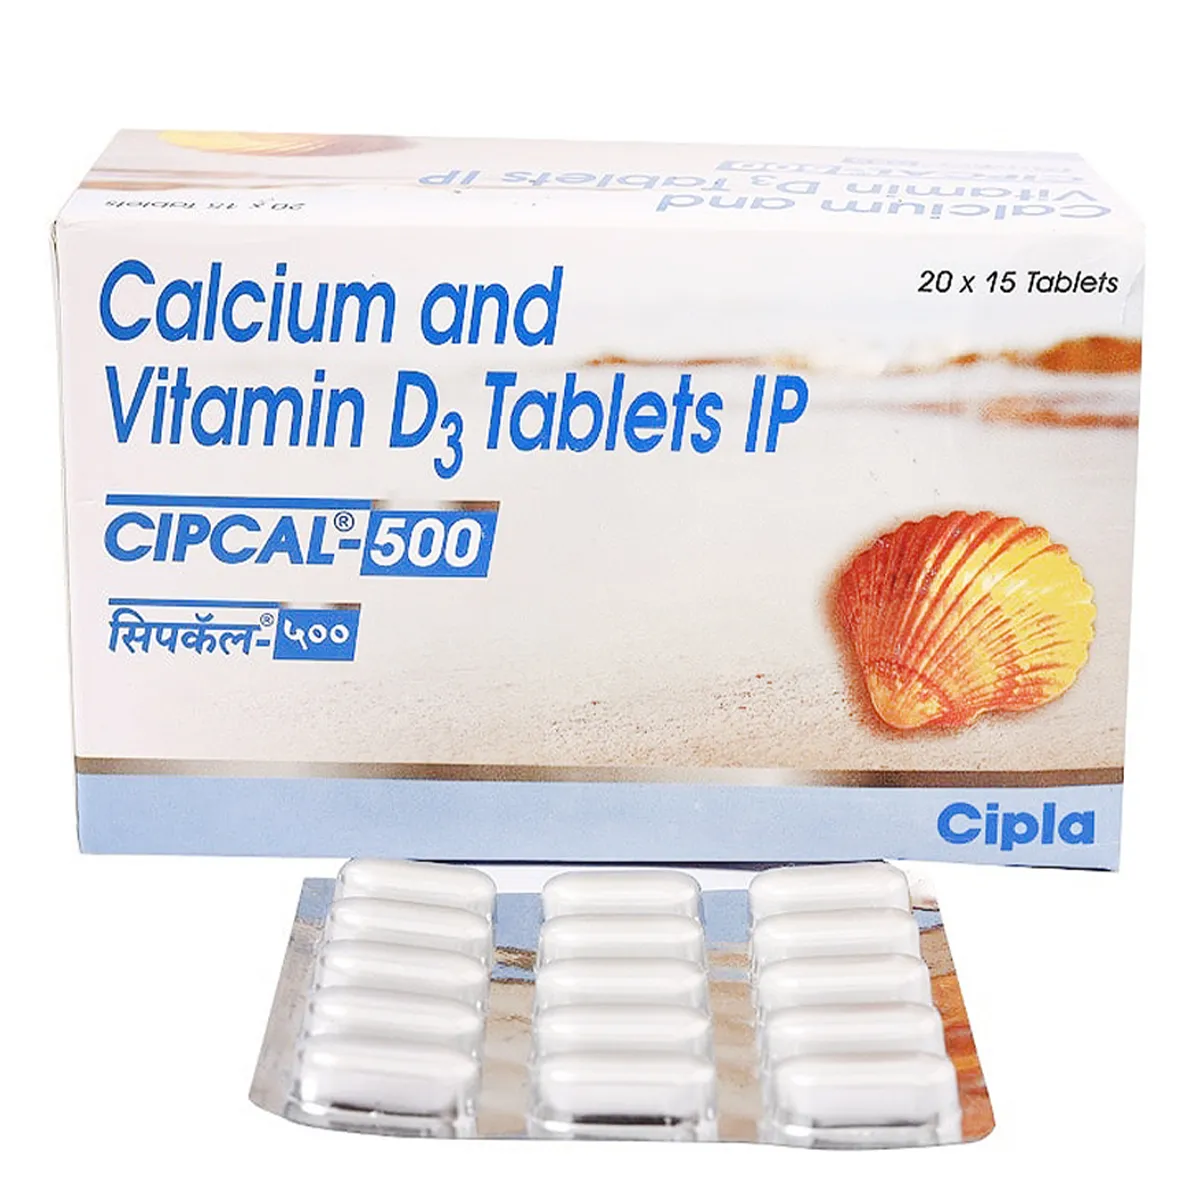 Cipcal 500 Tablet from Cipla for Bone, Joint and Muscle Care